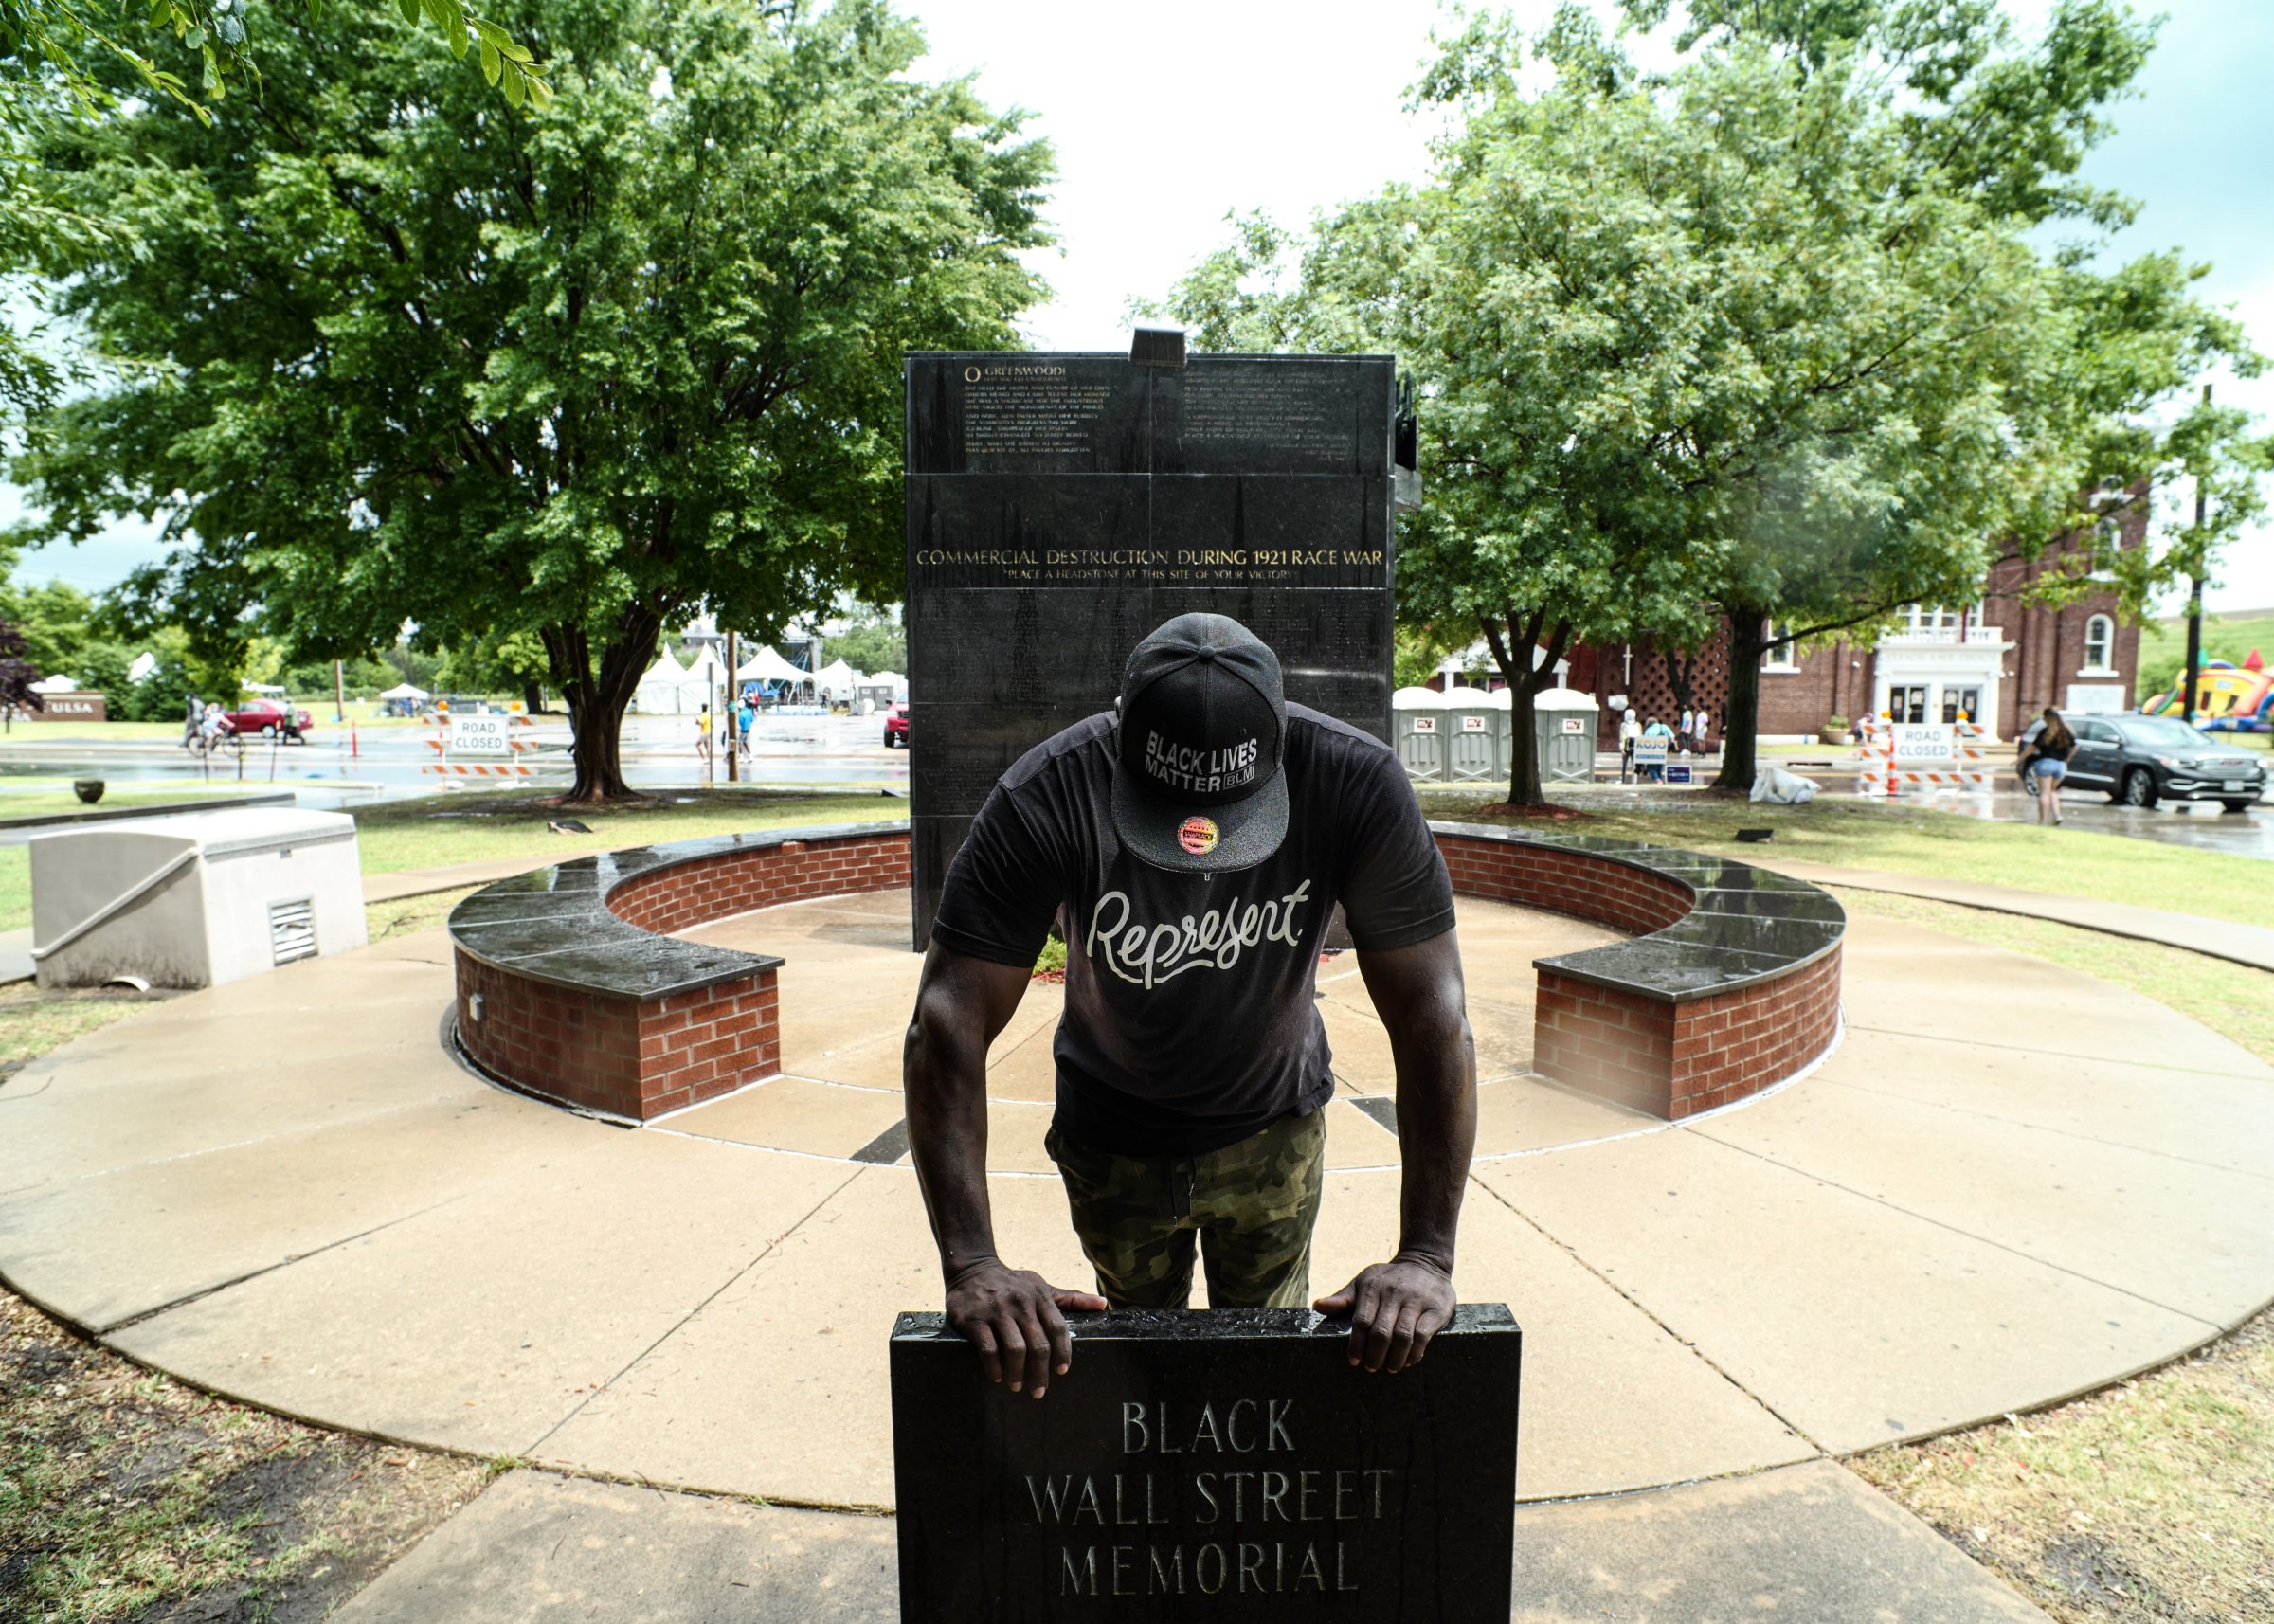 A memorial to Black Wall Street in Tulsa, Okla., on June 19, Juneteenth, a day before Trump’s rally